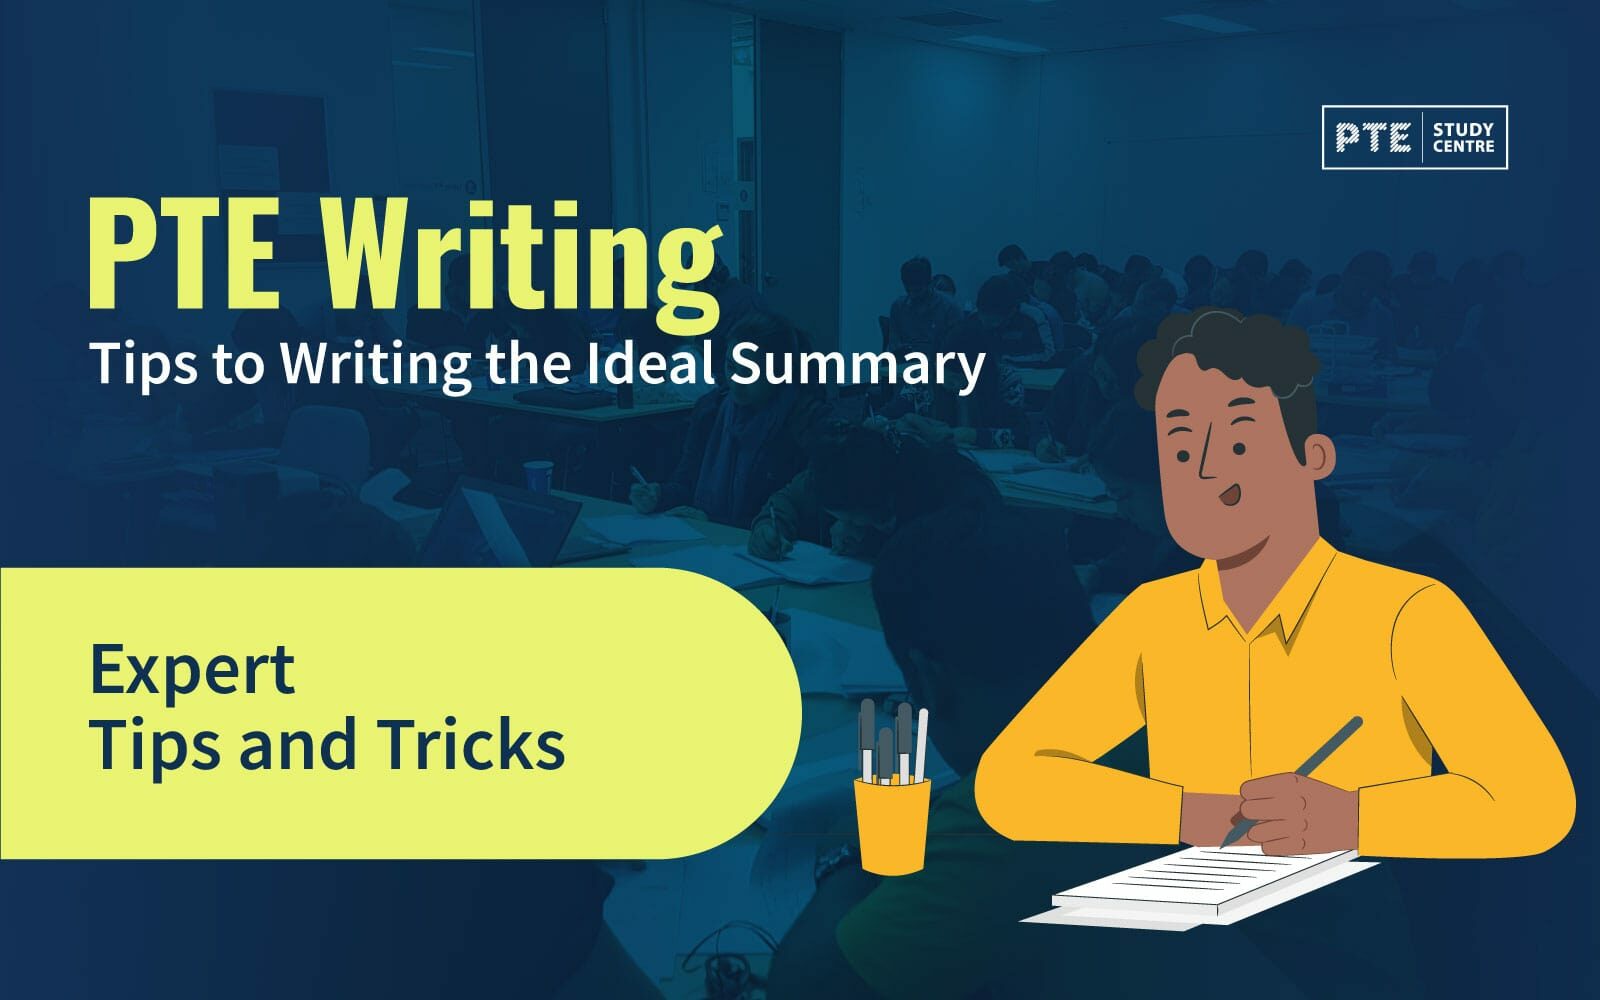 PTE Writing: Tips to Writing the Ideal Summary